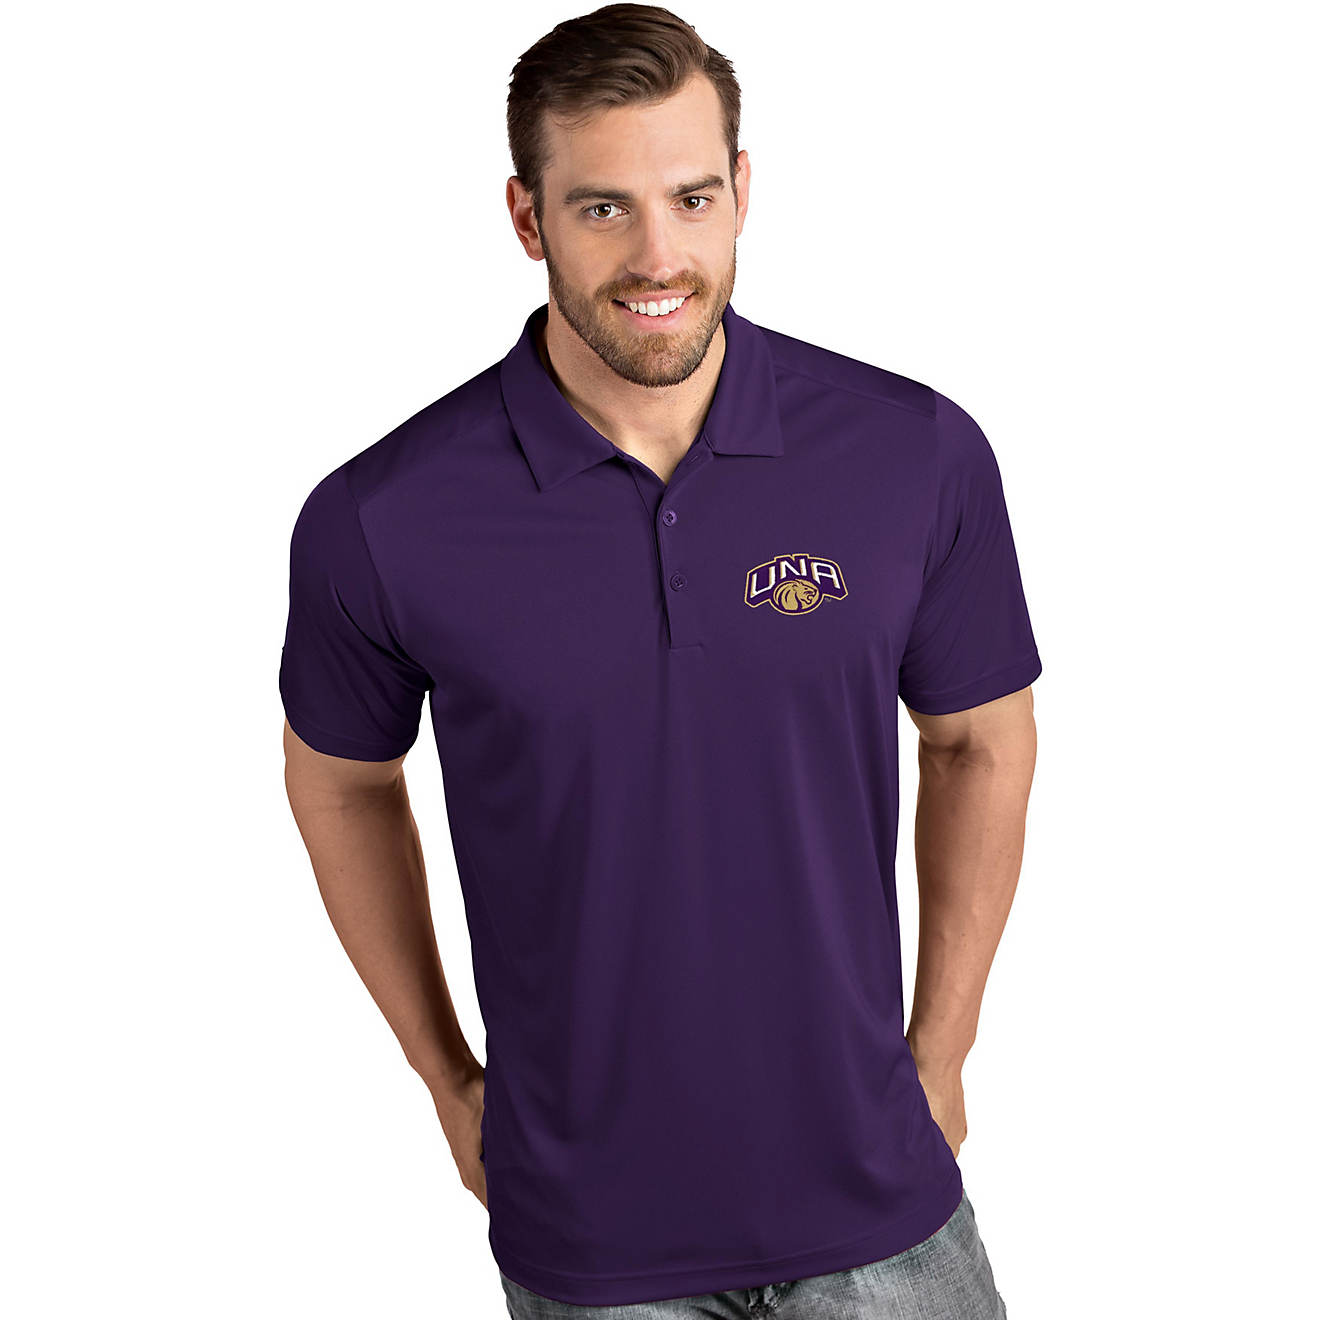 Antigua Men's University of North Alabama Tribute Polo Shirt                                                                     - view number 1